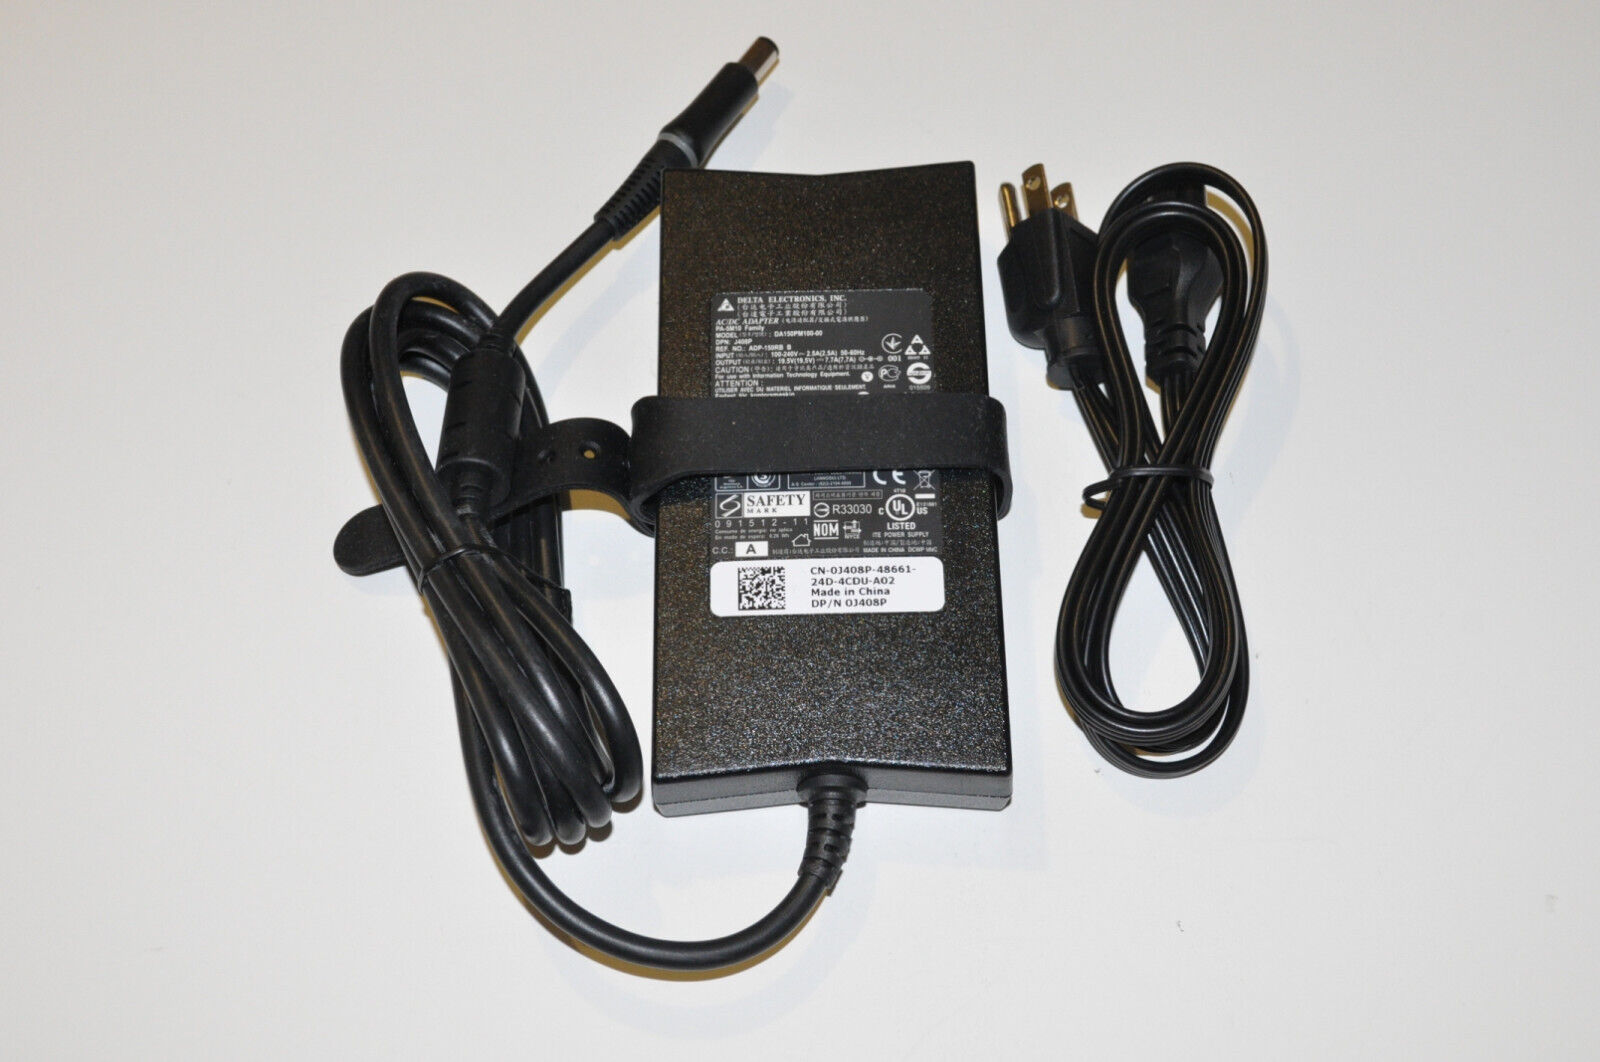 NEW Original OEM 150w Laptop Charger for Dell Latitude 5501, 5401